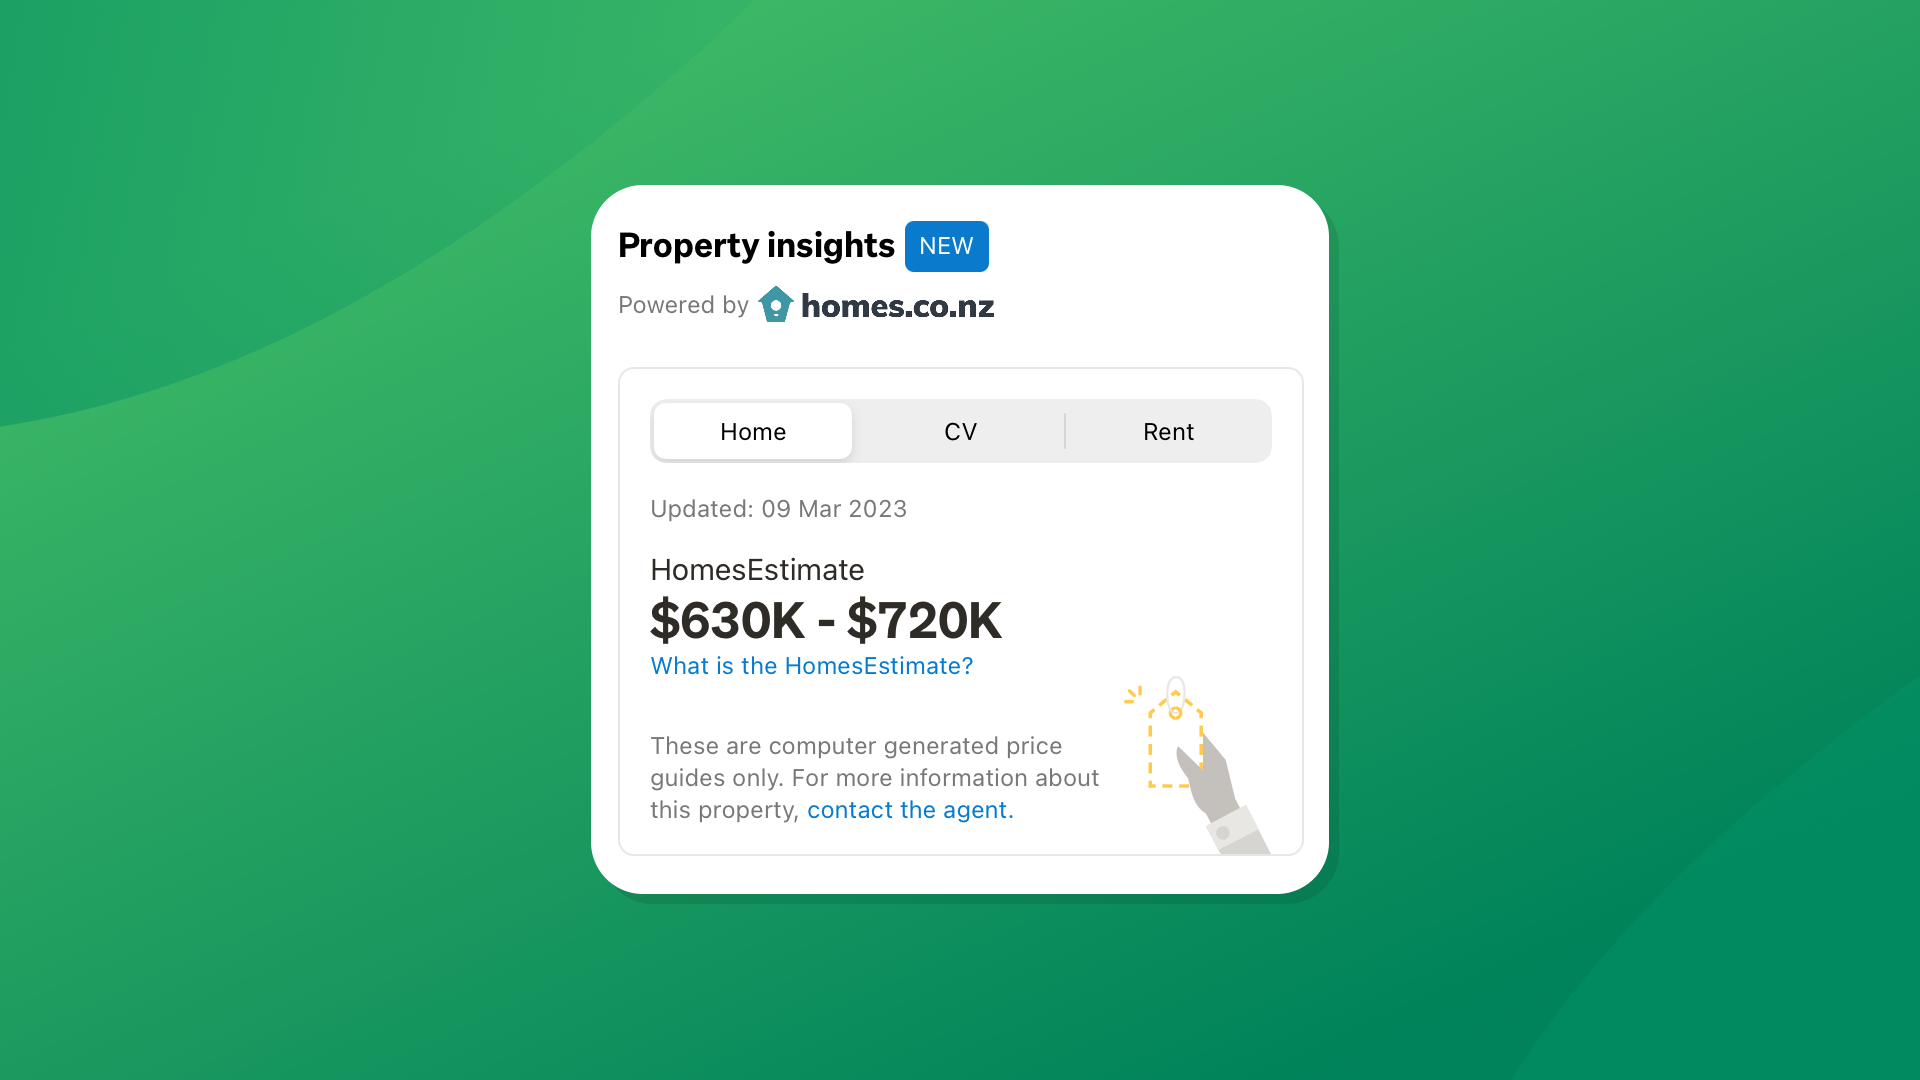 Property insights from homes.co.nz on Trade Me Property